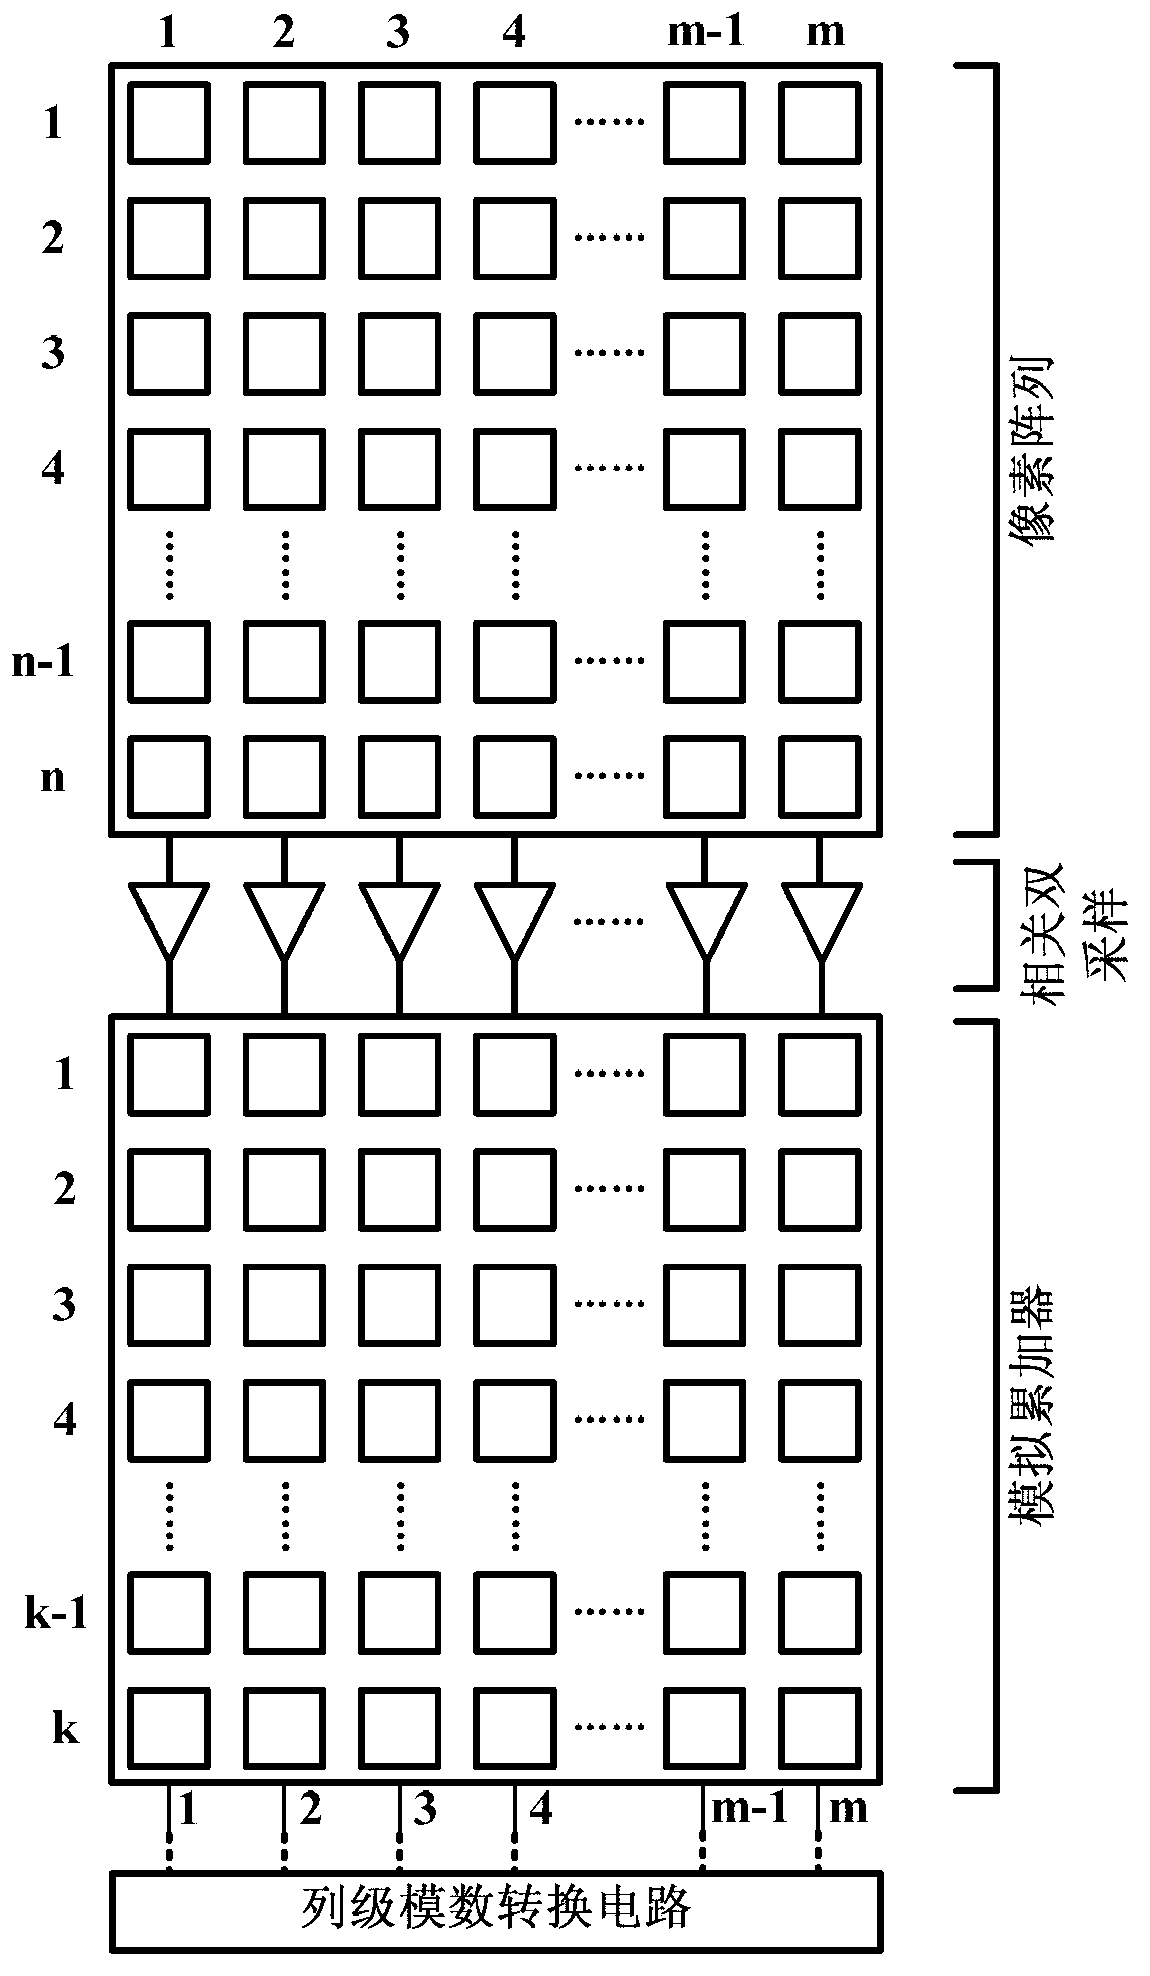 Low-power-consumption time delay integral type CMOS (Complementary Metal-Oxide-Semiconductor Transistor) image sensor